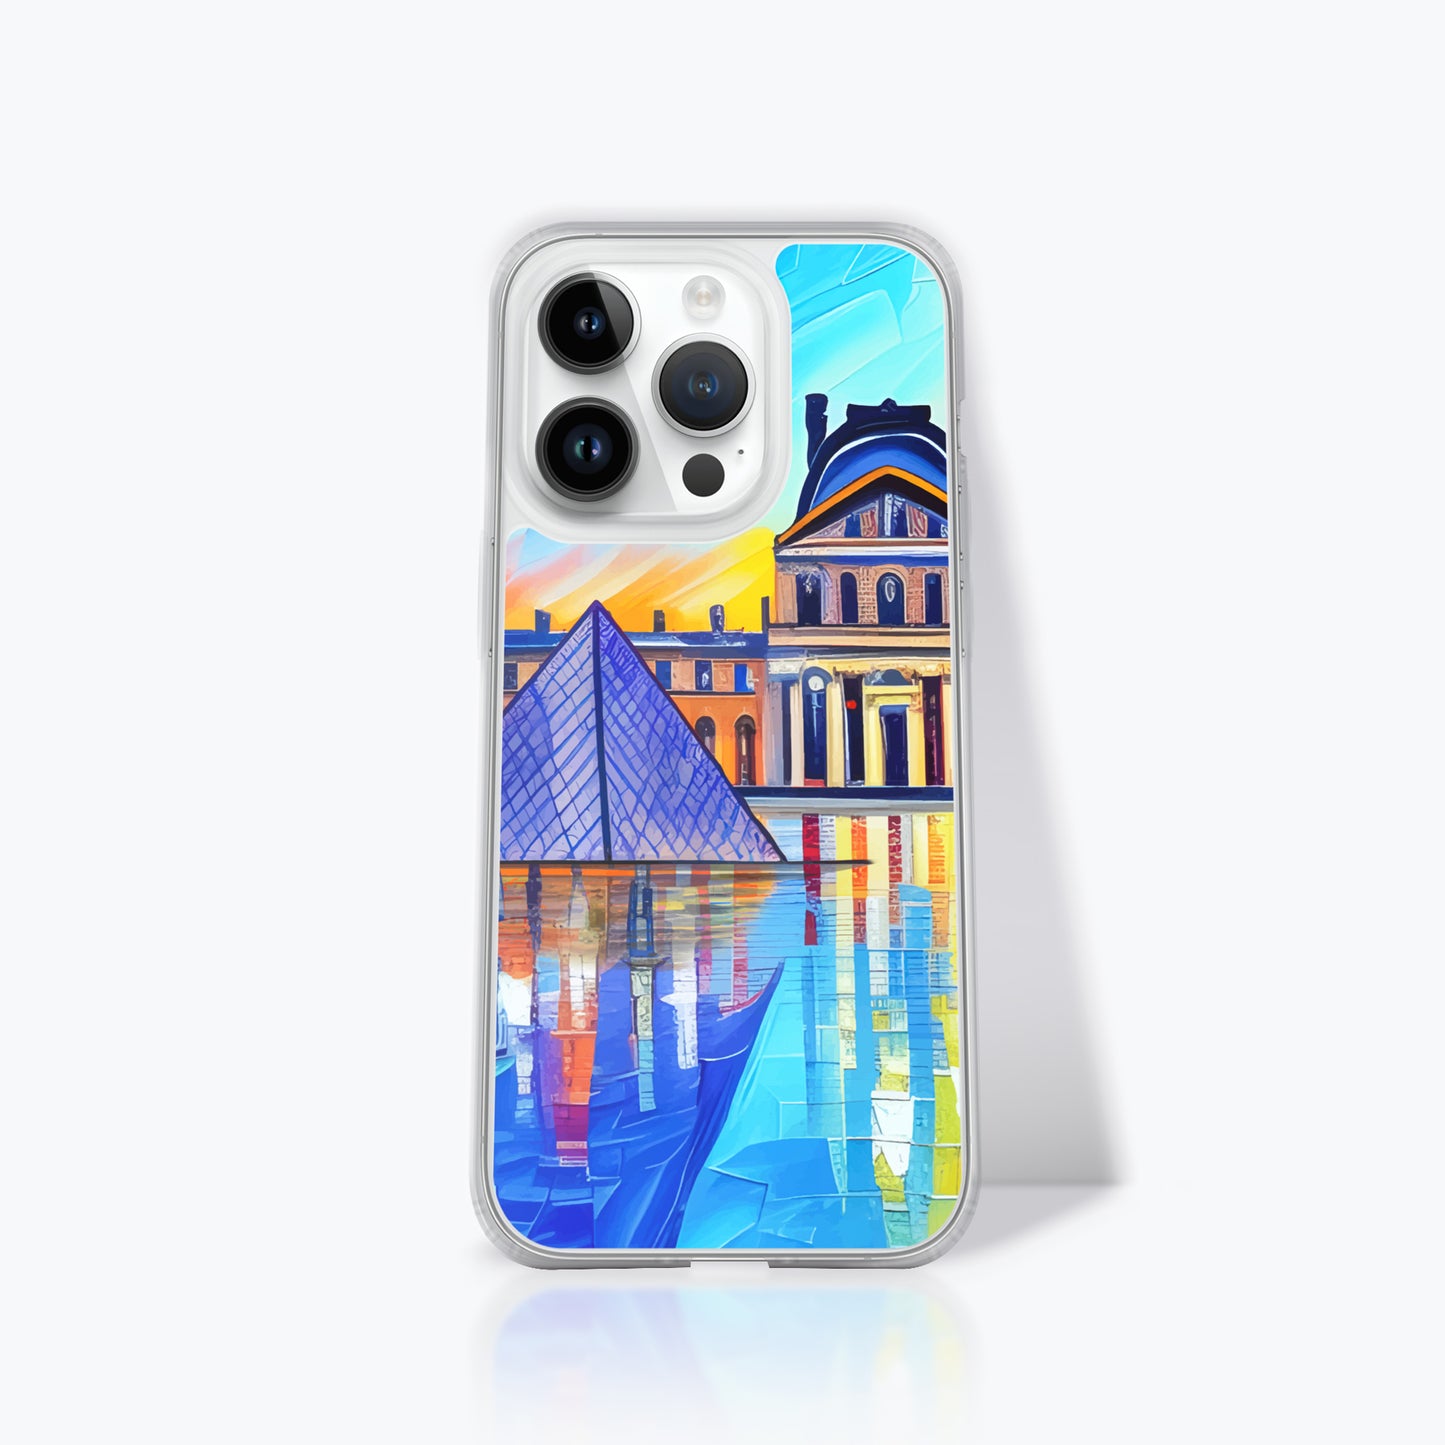 Fashionable iPhone Case with cityscape painting - Paris Louvre| Seepu | 